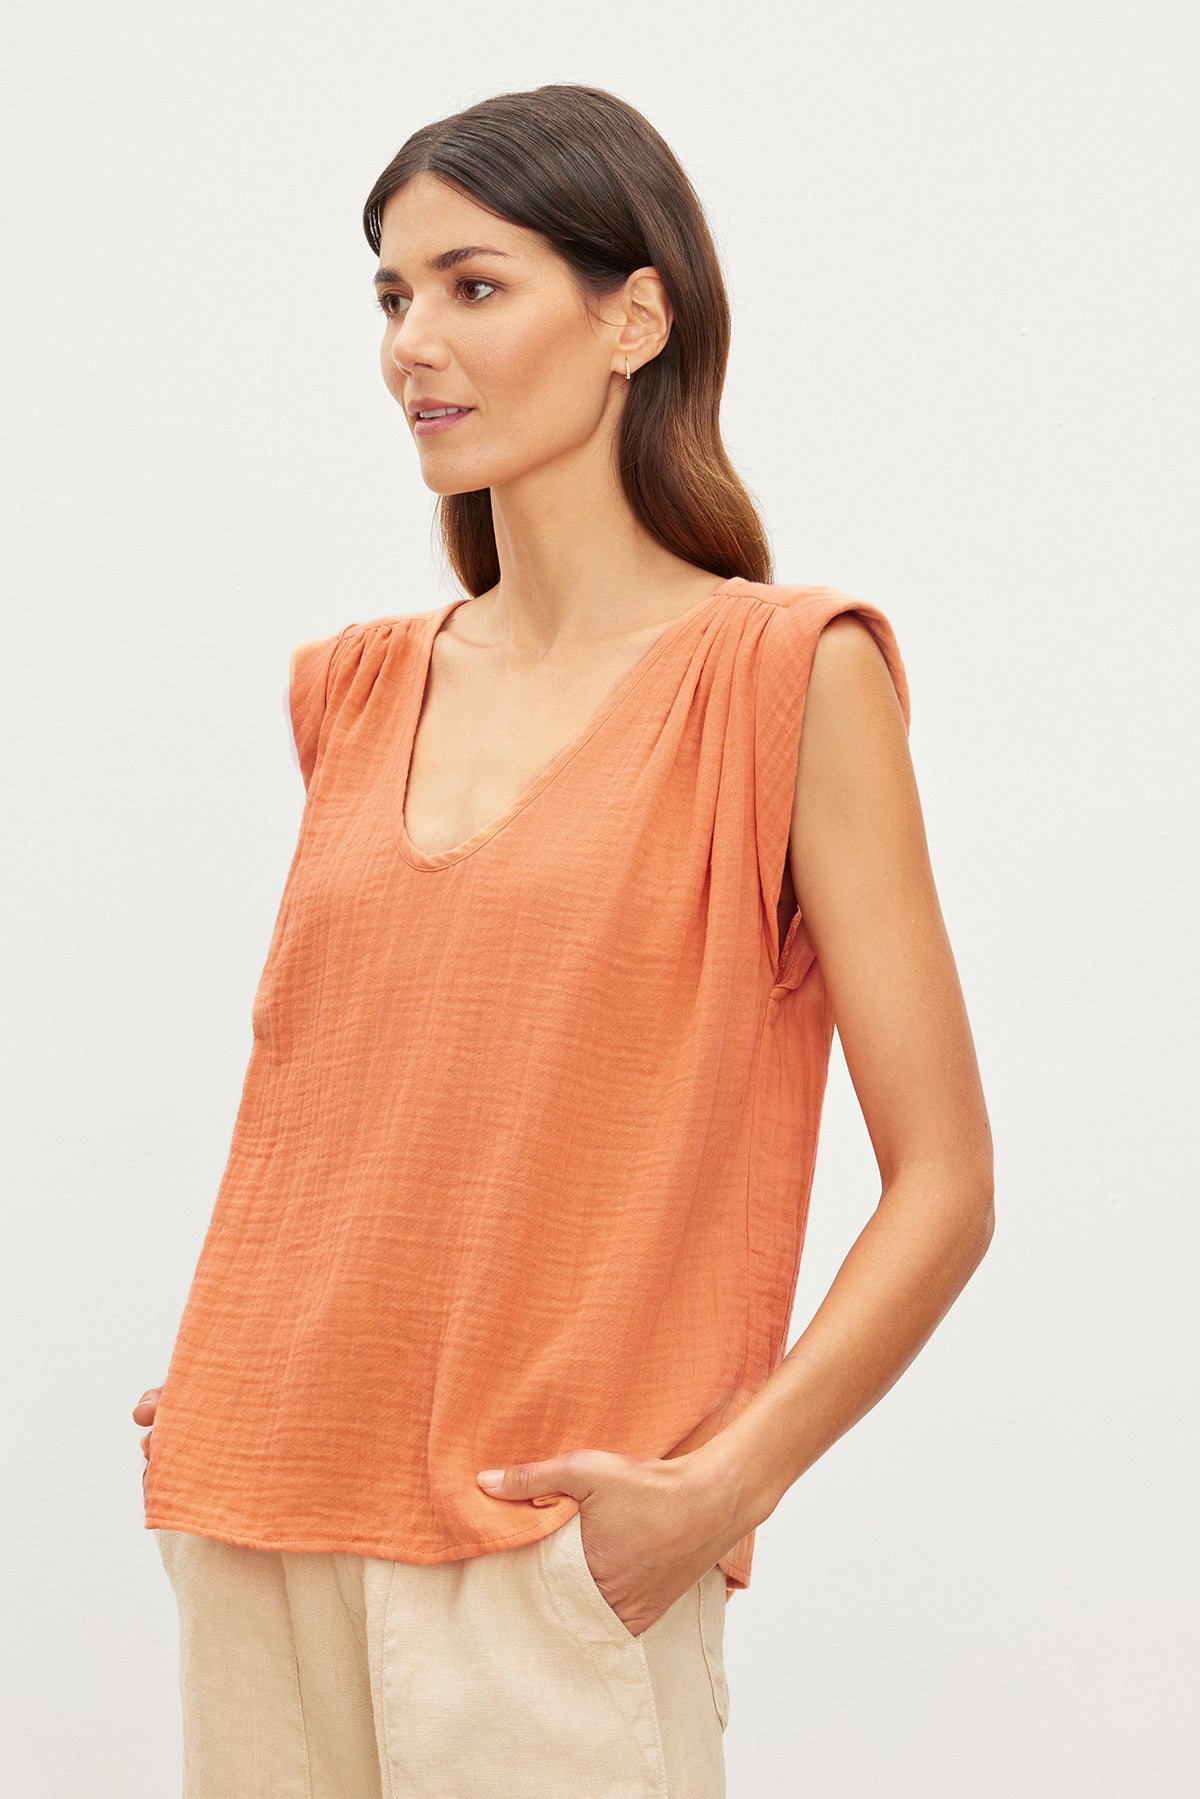   A woman wearing a JAYLA COTTON GAUZE TANK TOP by Velvet by Graham & Spencer with a scoop neck. 